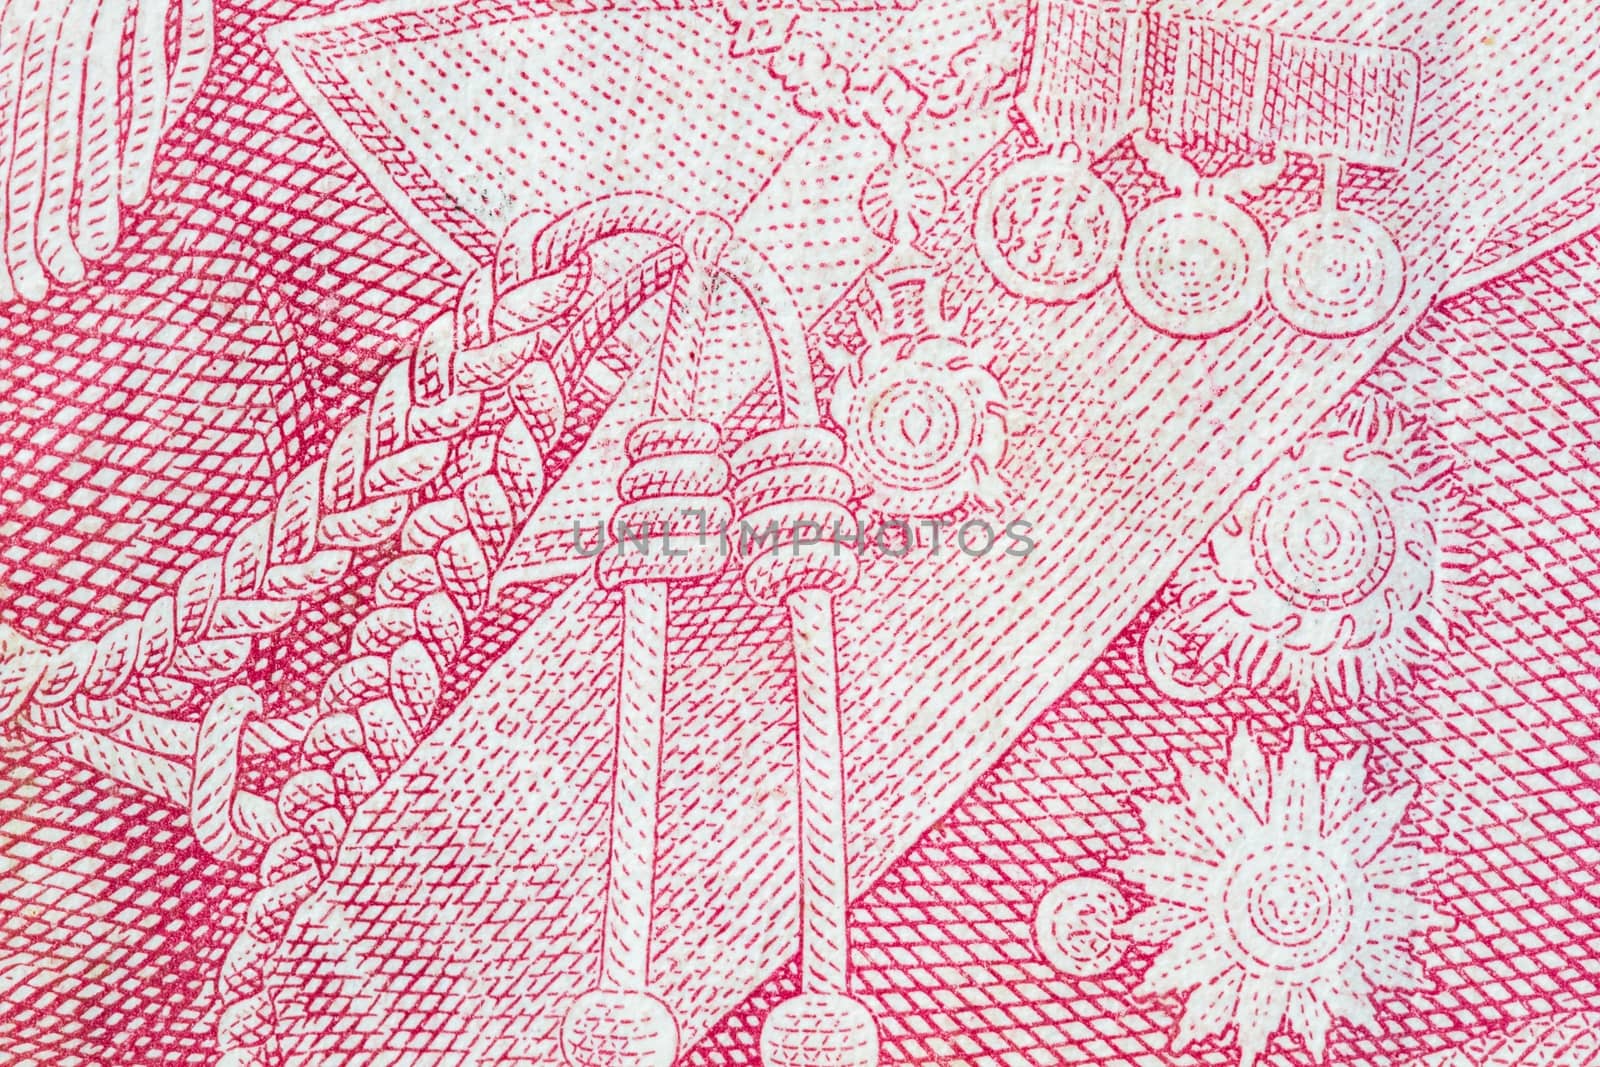 close up of thai money 100 baht, as background by a3701027